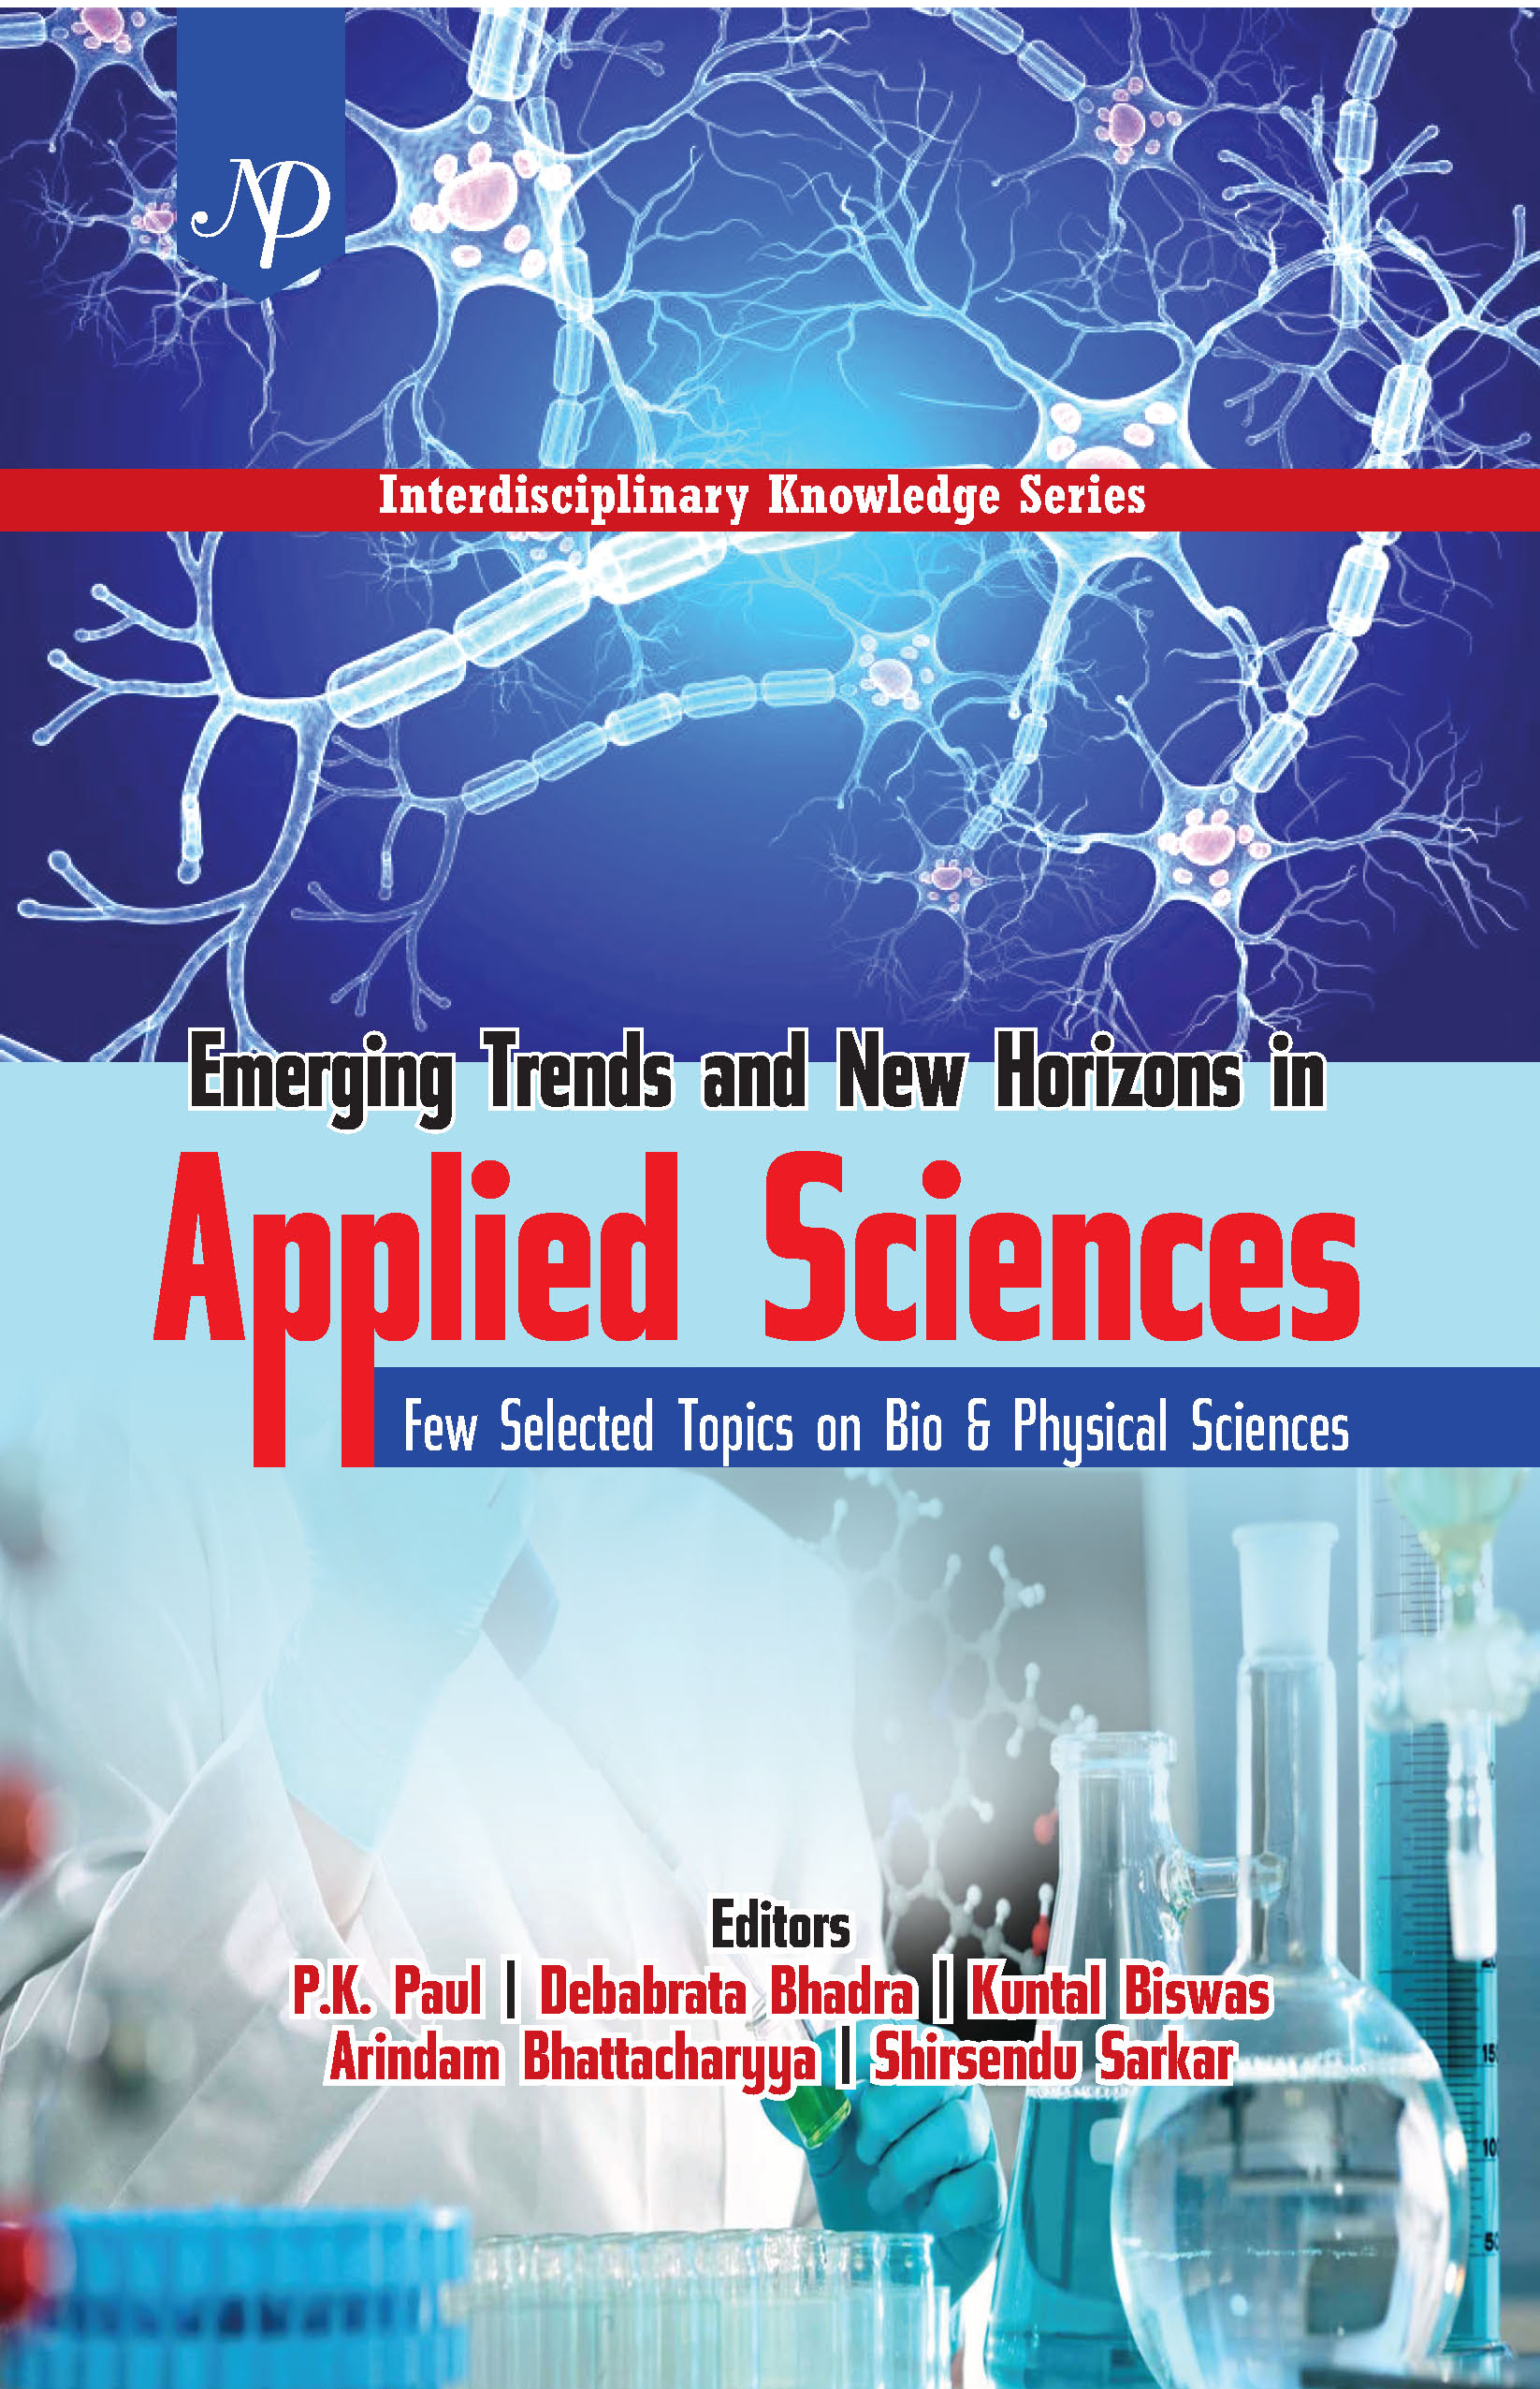 Emerging Trends and New Horizons in Applied Sciences by PK Paul.jpg